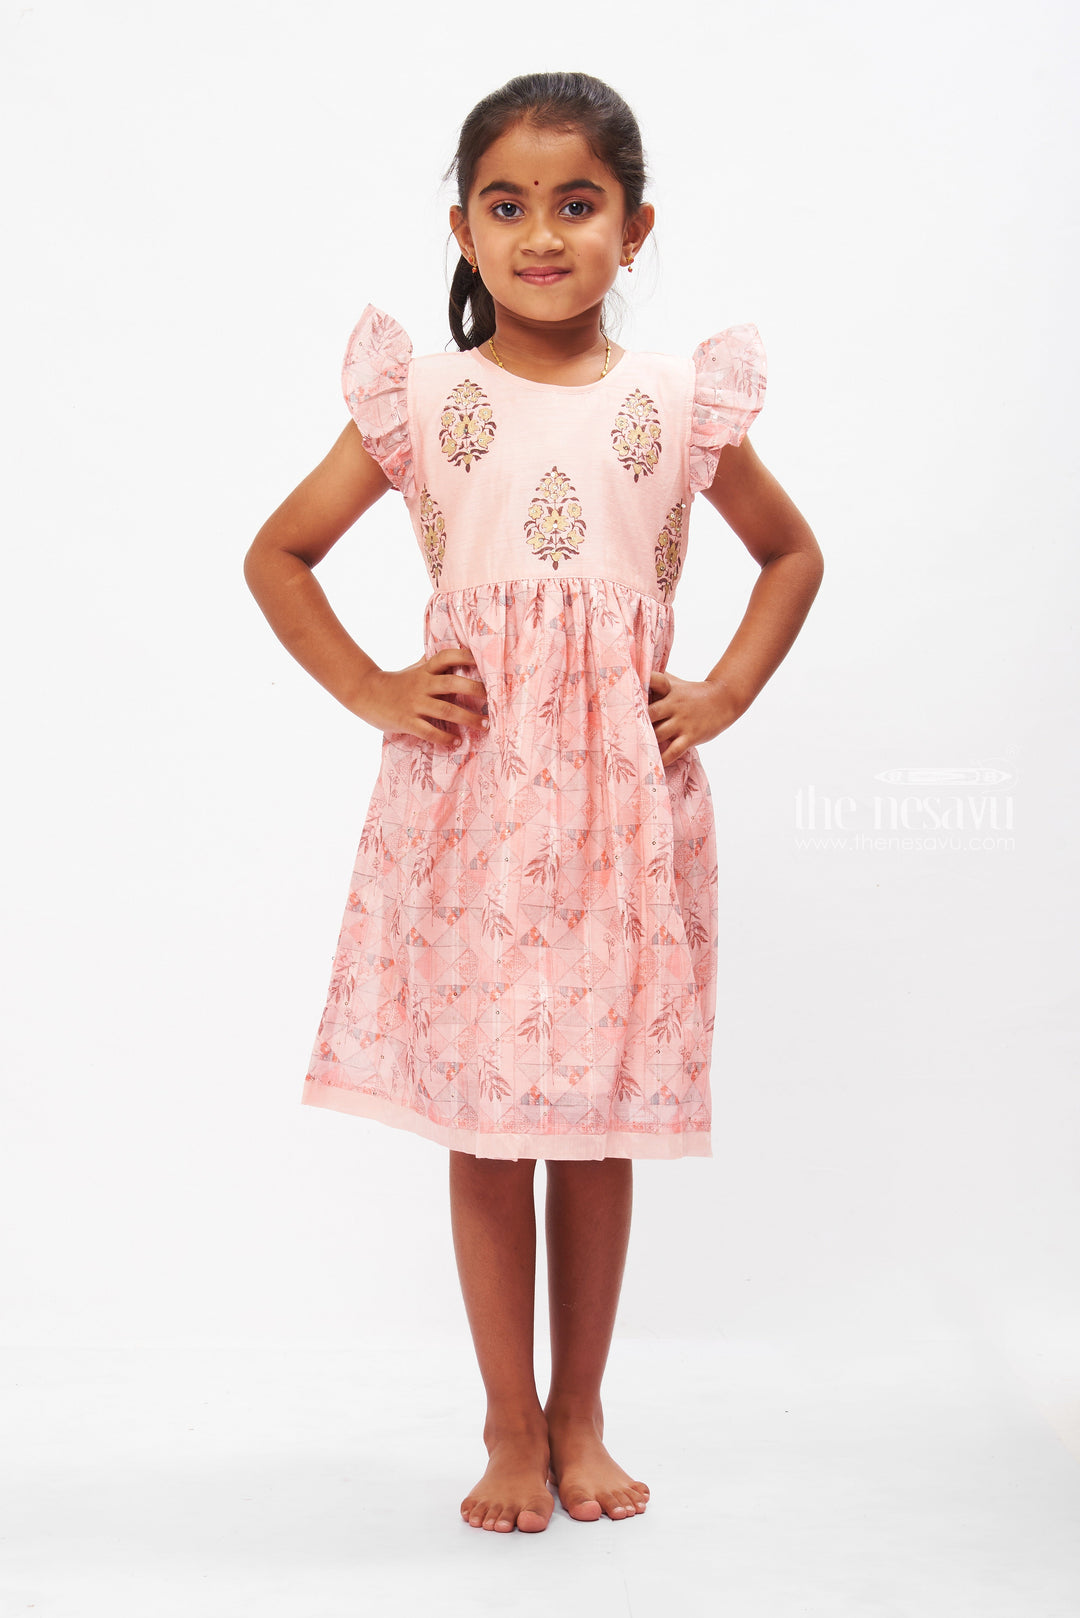 The Nesavu Girls Cotton Frock Coral Cotton Frock with Embellished Bodice and Ruffled Sleeves for Girls Nesavu 16 (1Y) / Pink GFC1235A-16 Girls Chic Cotton Dress Designs | Coral Frock with Ruffle Detail | The Nesavu